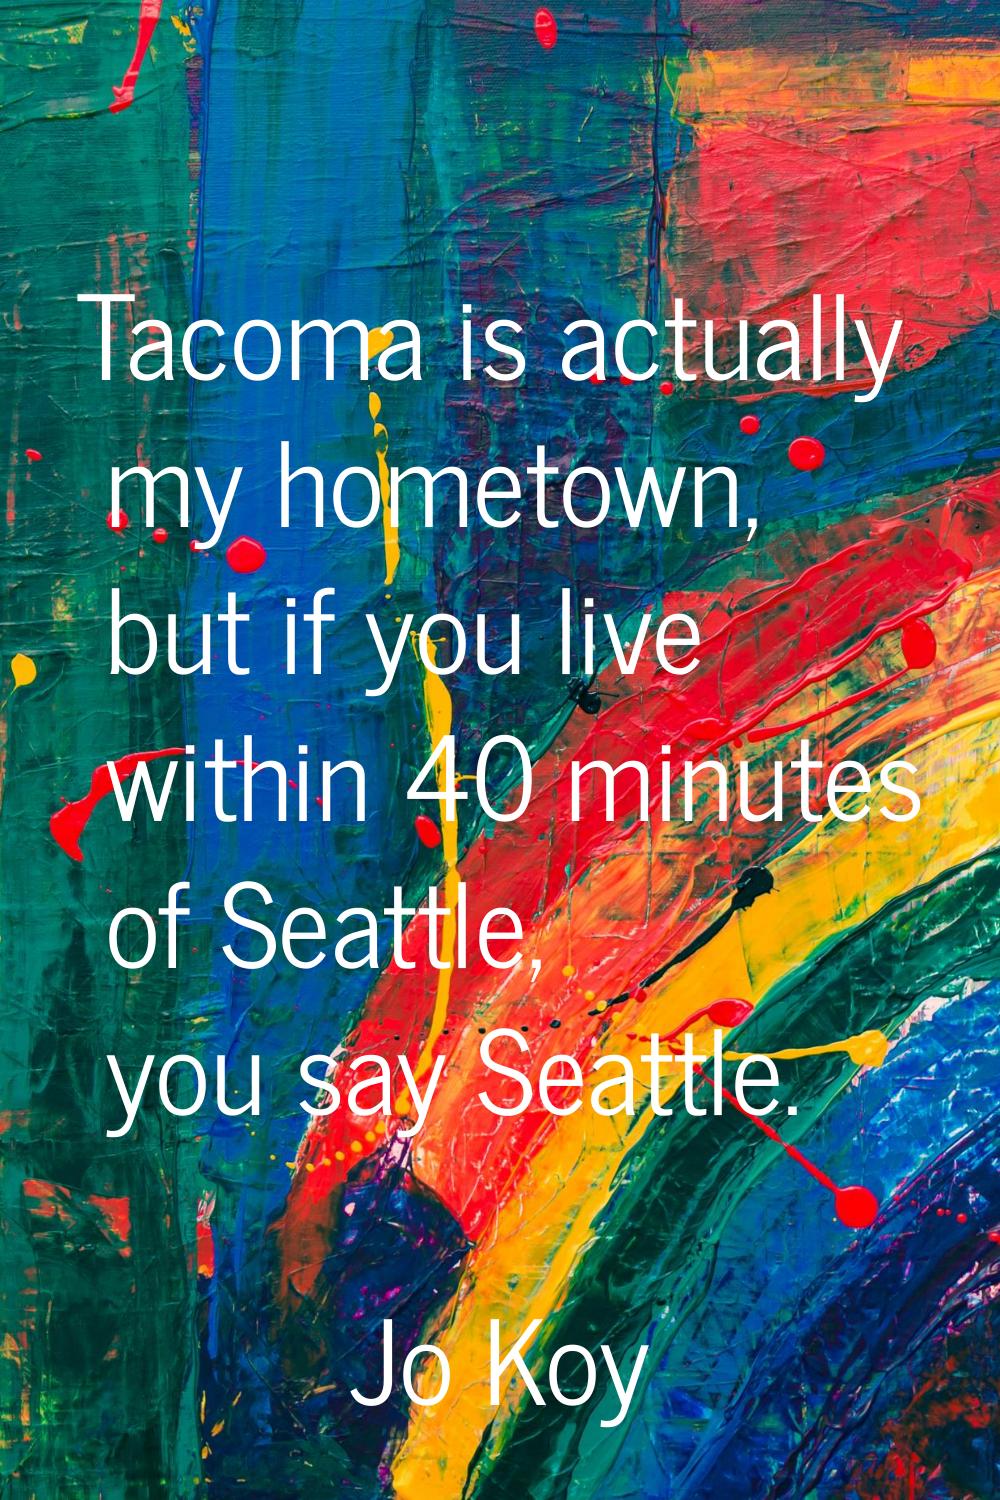 Tacoma is actually my hometown, but if you live within 40 minutes of Seattle, you say Seattle.